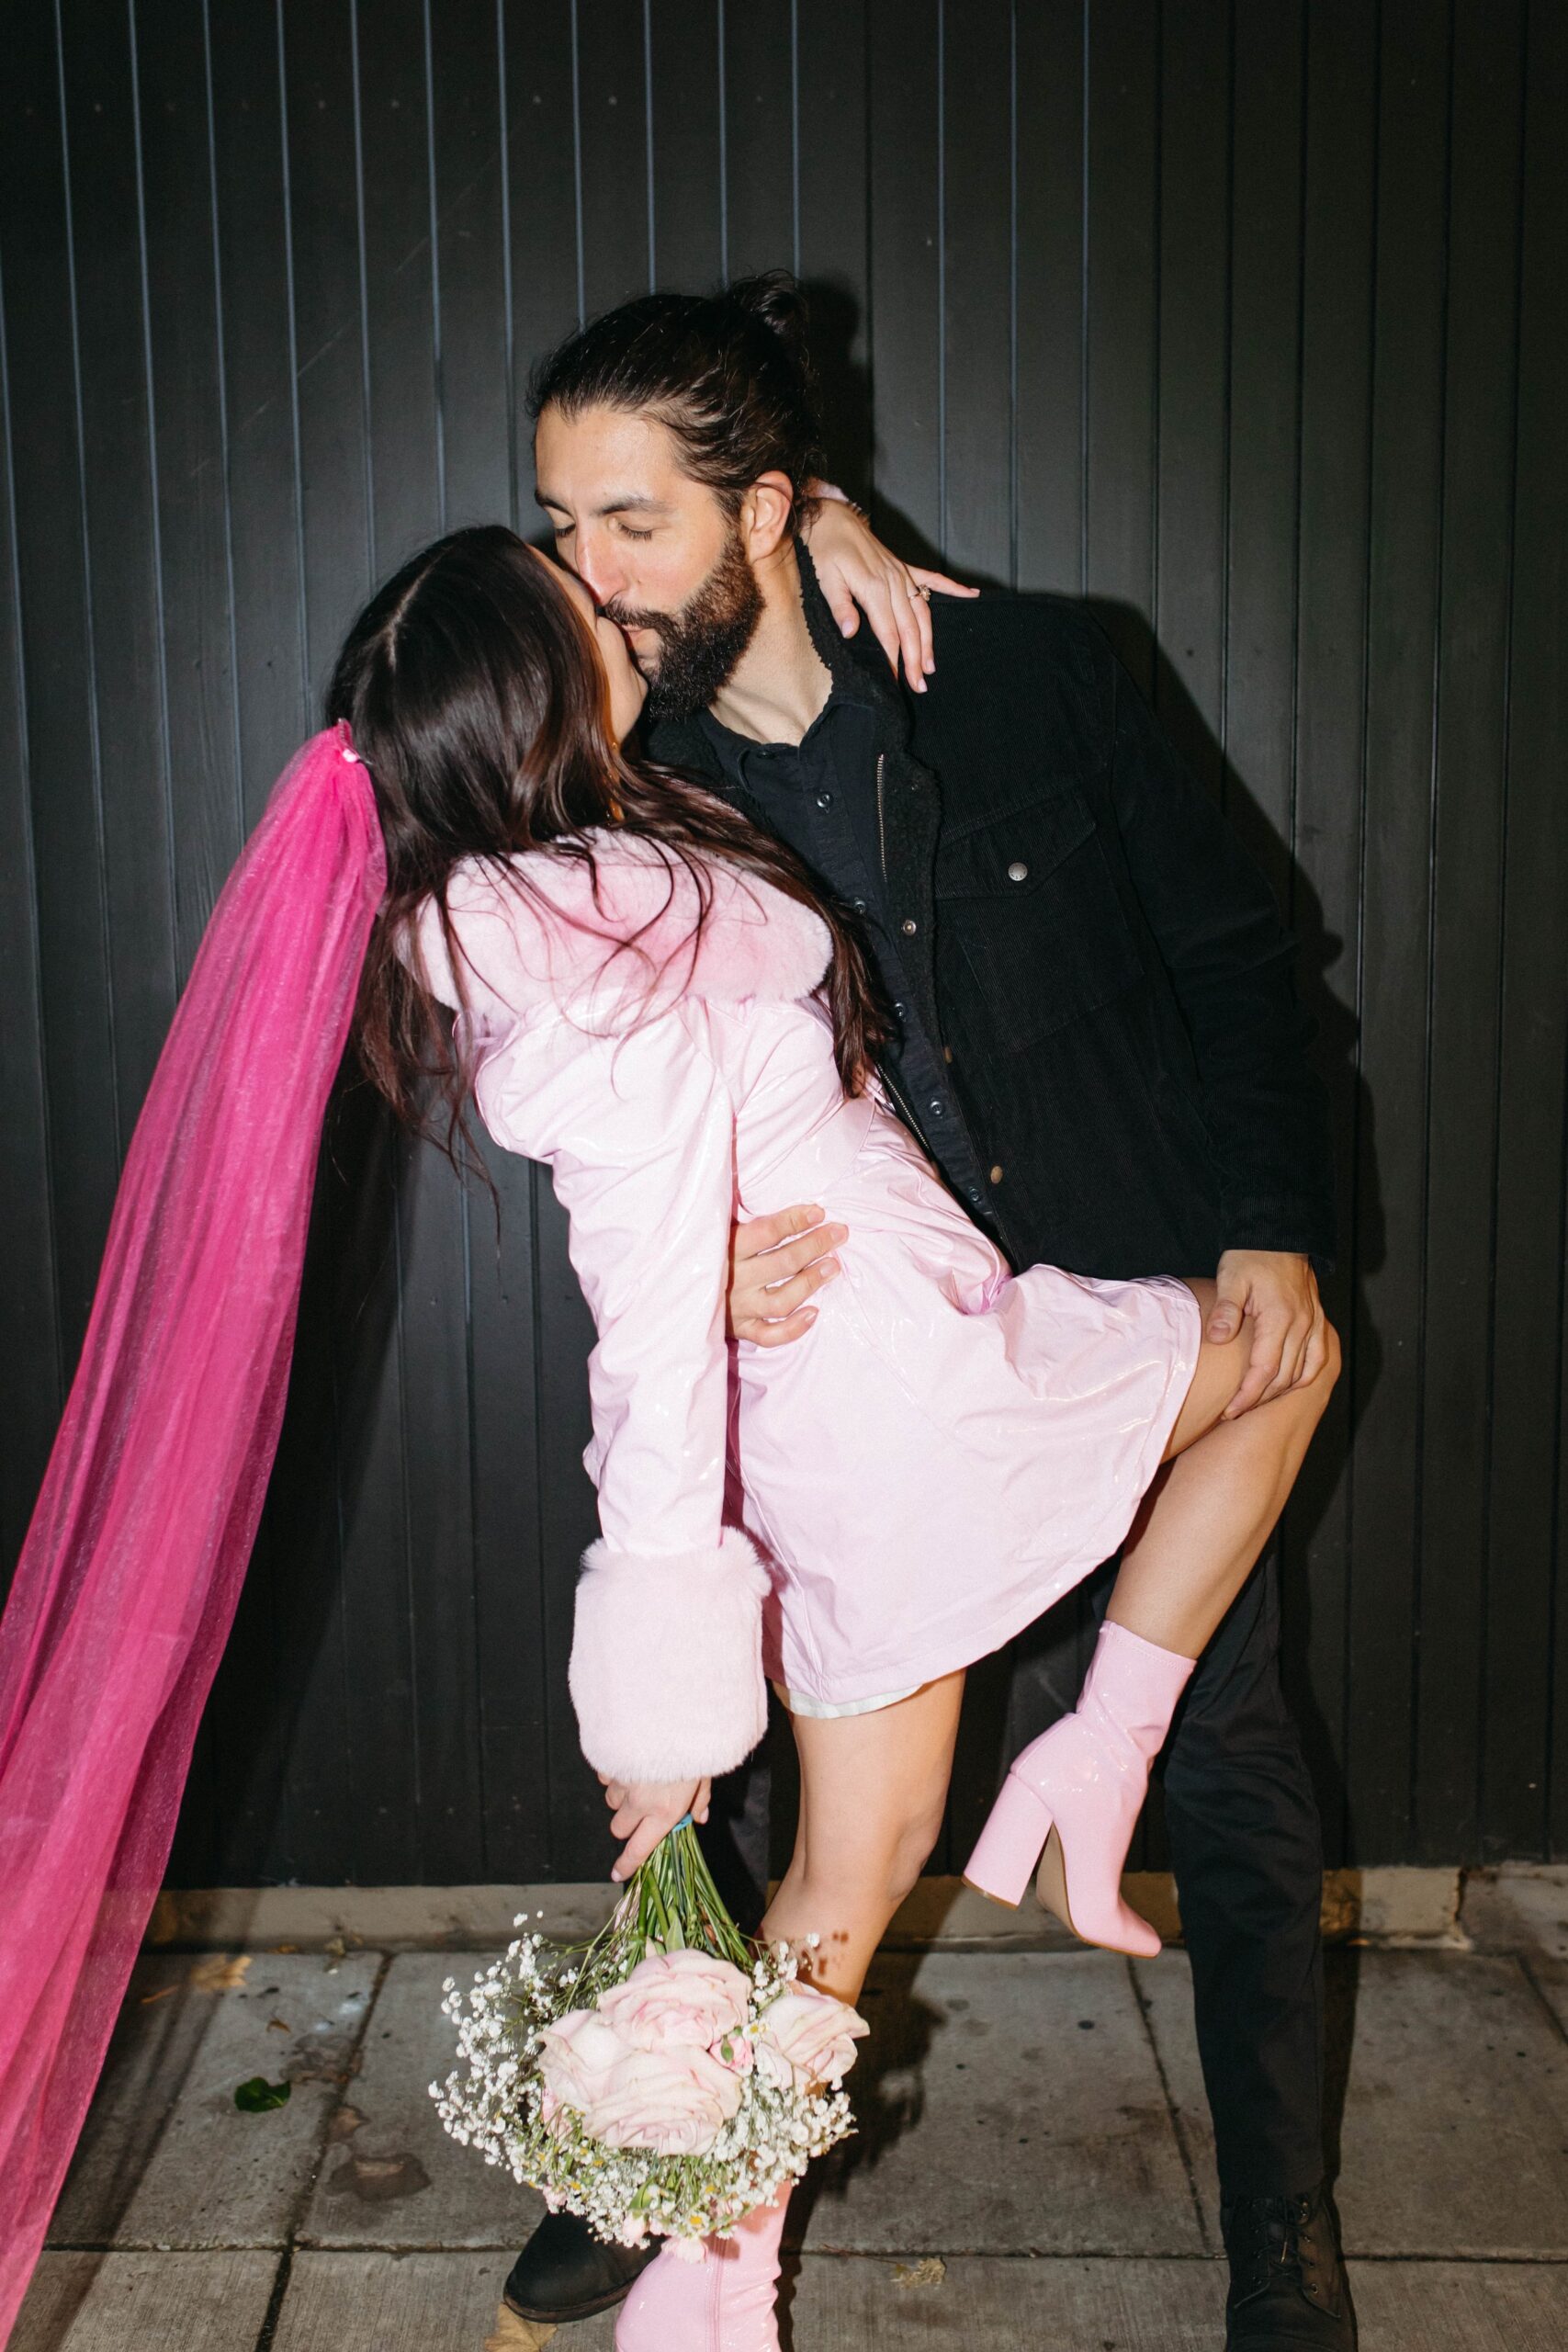  funky, modern, engagement photoshoot, neon signs, fun earrings, the unique couple poses, vegas inspired elopement nasty gal two-piece set, colorful suit, pearl gloves, movie theater, vintage, retro 